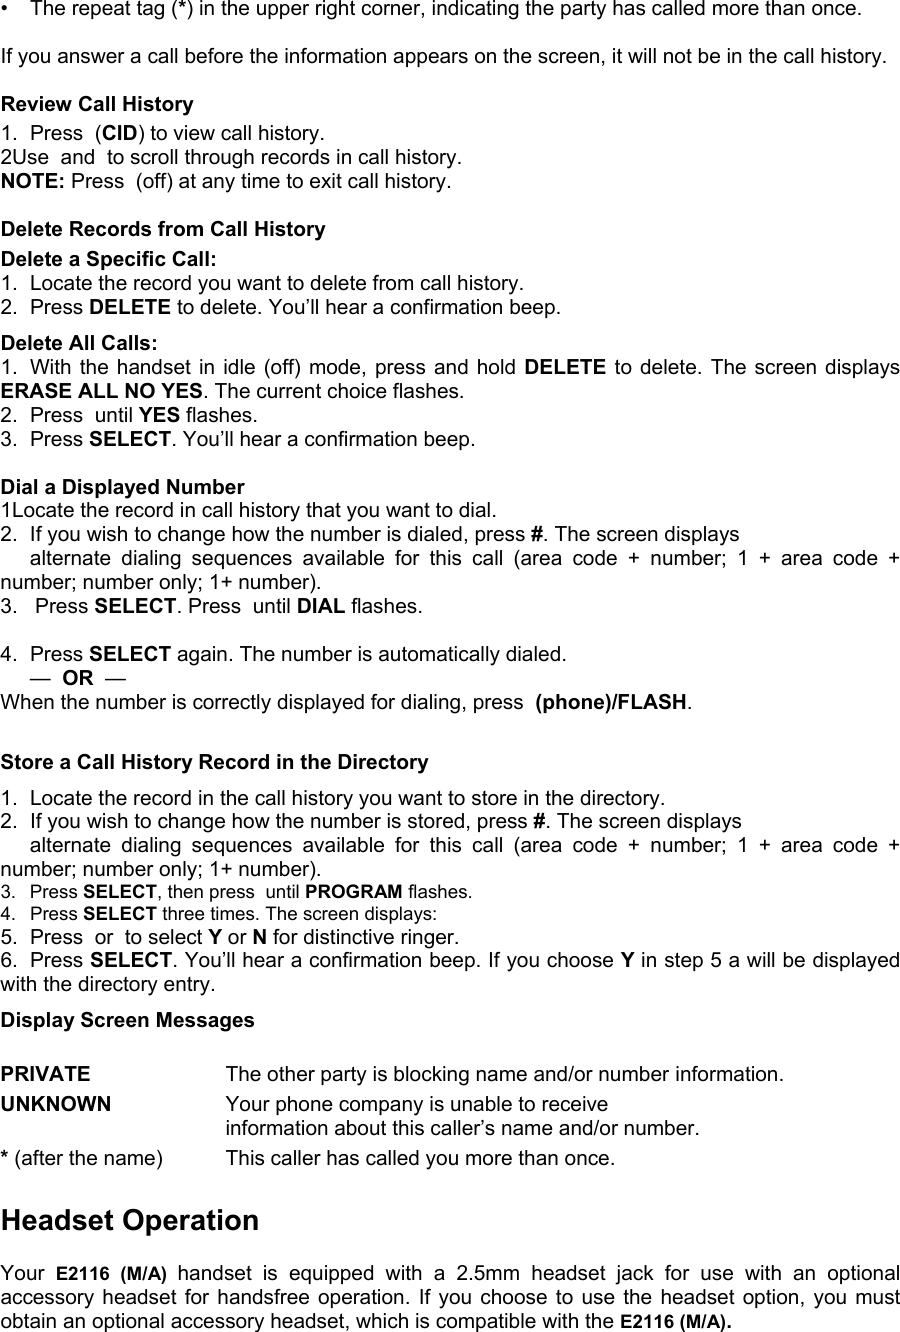 •  The repeat tag (*) in the upper right corner, indicating the party has called more than once.  If you answer a call before the information appears on the screen, it will not be in the call history.  Review Call History 1.  Press  (CID) to view call history.  2Use  and  to scroll through records in call history. NOTE: Press  (off) at any time to exit call history.  Delete Records from Call History Delete a Specific Call: 1.  Locate the record you want to delete from call history. 2. Press DELETE to delete. You’ll hear a confirmation beep. Delete All Calls: 1.  With the handset in idle (off) mode, press and hold DELETE to delete. The screen displays ERASE ALL NO YES. The current choice flashes. 2.  Press  until YES flashes. 3. Press SELECT. You’ll hear a confirmation beep.  Dial a Displayed Number 1Locate the record in call history that you want to dial. 2. If you wish to change how the number is dialed, press #. The screen displays     alternate dialing sequences available for this call (area code + number; 1 + area code + number; number only; 1+ number). 3.   Press SELECT. Press  until DIAL flashes.  4. Press SELECT again. The number is automatically dialed.  —  OR  —   When the number is correctly displayed for dialing, press  (phone)/FLASH.  Store a Call History Record in the Directory 1.  Locate the record in the call history you want to store in the directory. 2.  If you wish to change how the number is stored, press #. The screen displays    alternate dialing sequences available for this call (area code + number; 1 + area code + number; number only; 1+ number). 3. Press SELECT, then press  until PROGRAM flashes. 4. Press SELECT three times. The screen displays: 5.  Press  or  to select Y or N for distinctive ringer. 6. Press SELECT. You’ll hear a confirmation beep. If you choose Y in step 5 a will be displayed with the directory entry. Display Screen Messages  PRIVATE     The other party is blocking name and/or number  information. UNKNOWN     Your phone company is unable to receive     information about this caller’s name and/or number. * (after the name)    This caller has called you more than once.  Headset Operation  Your  E2116 (M/A) handset is equipped with a 2.5mm headset jack for use with an optional accessory headset for handsfree operation. If you choose to use the headset option, you must obtain an optional accessory headset, which is compatible with the E2116 (M/A). 